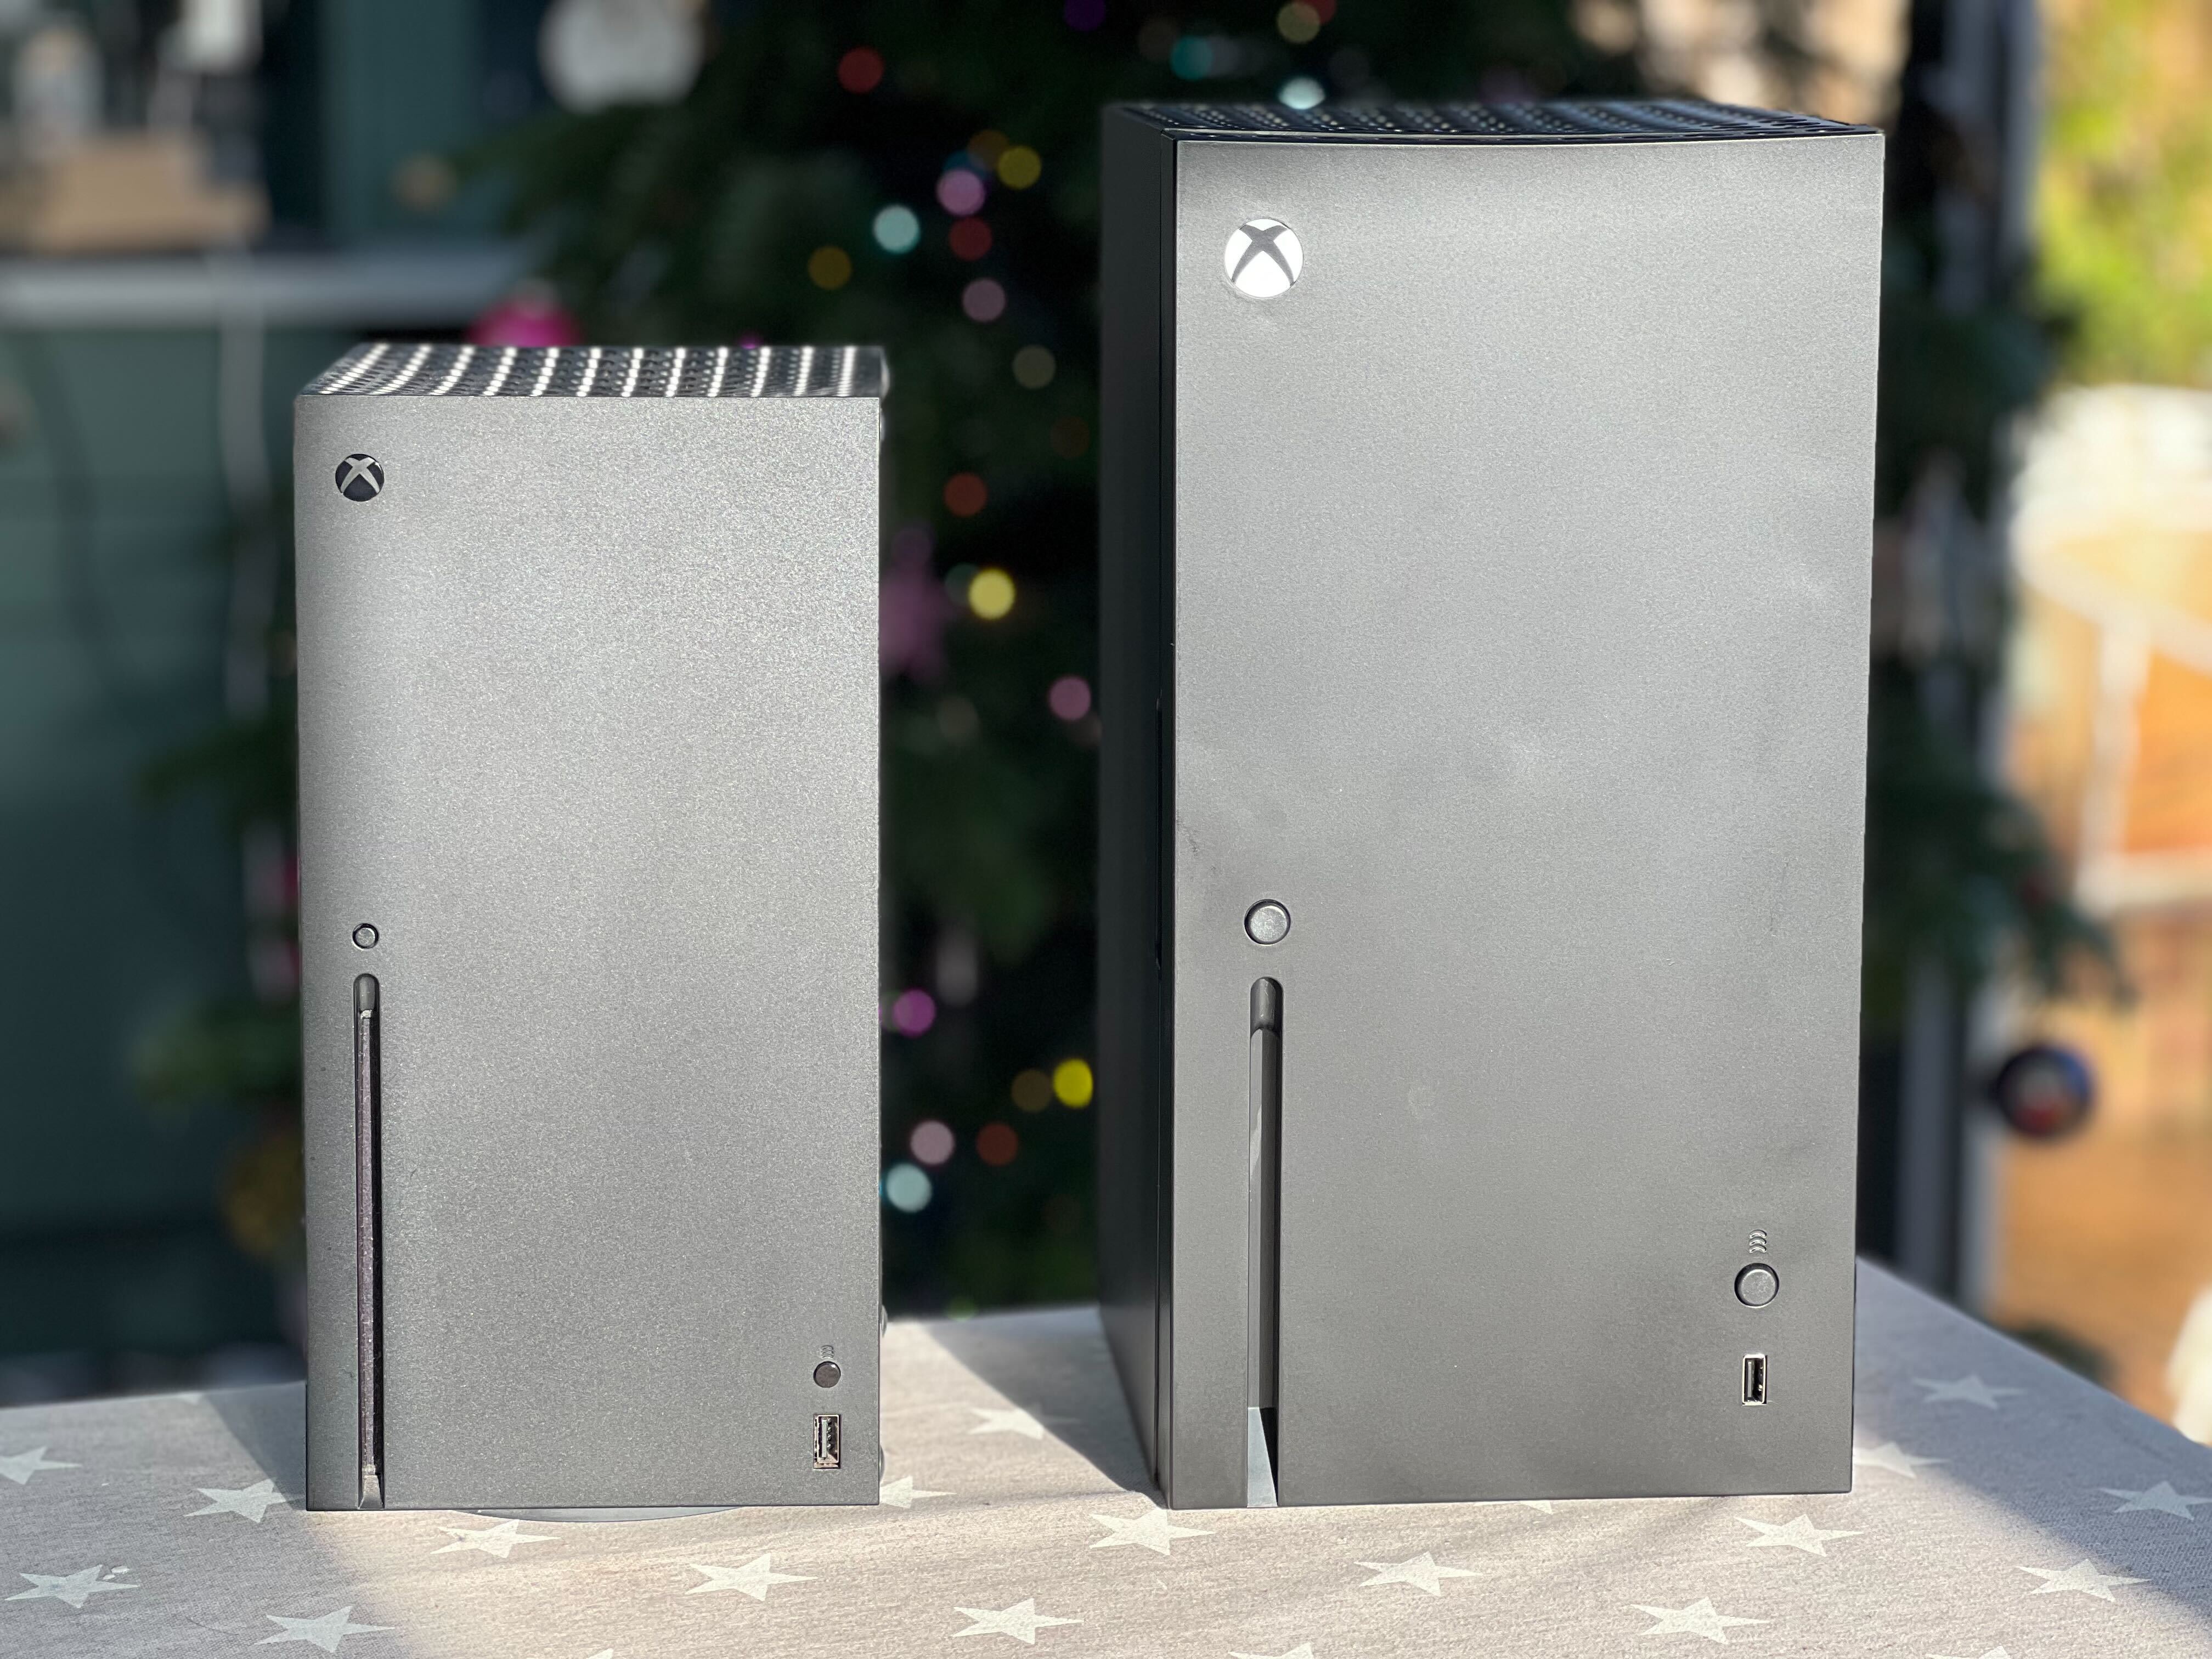 Xbox continues the meme with new Series X mini fridges